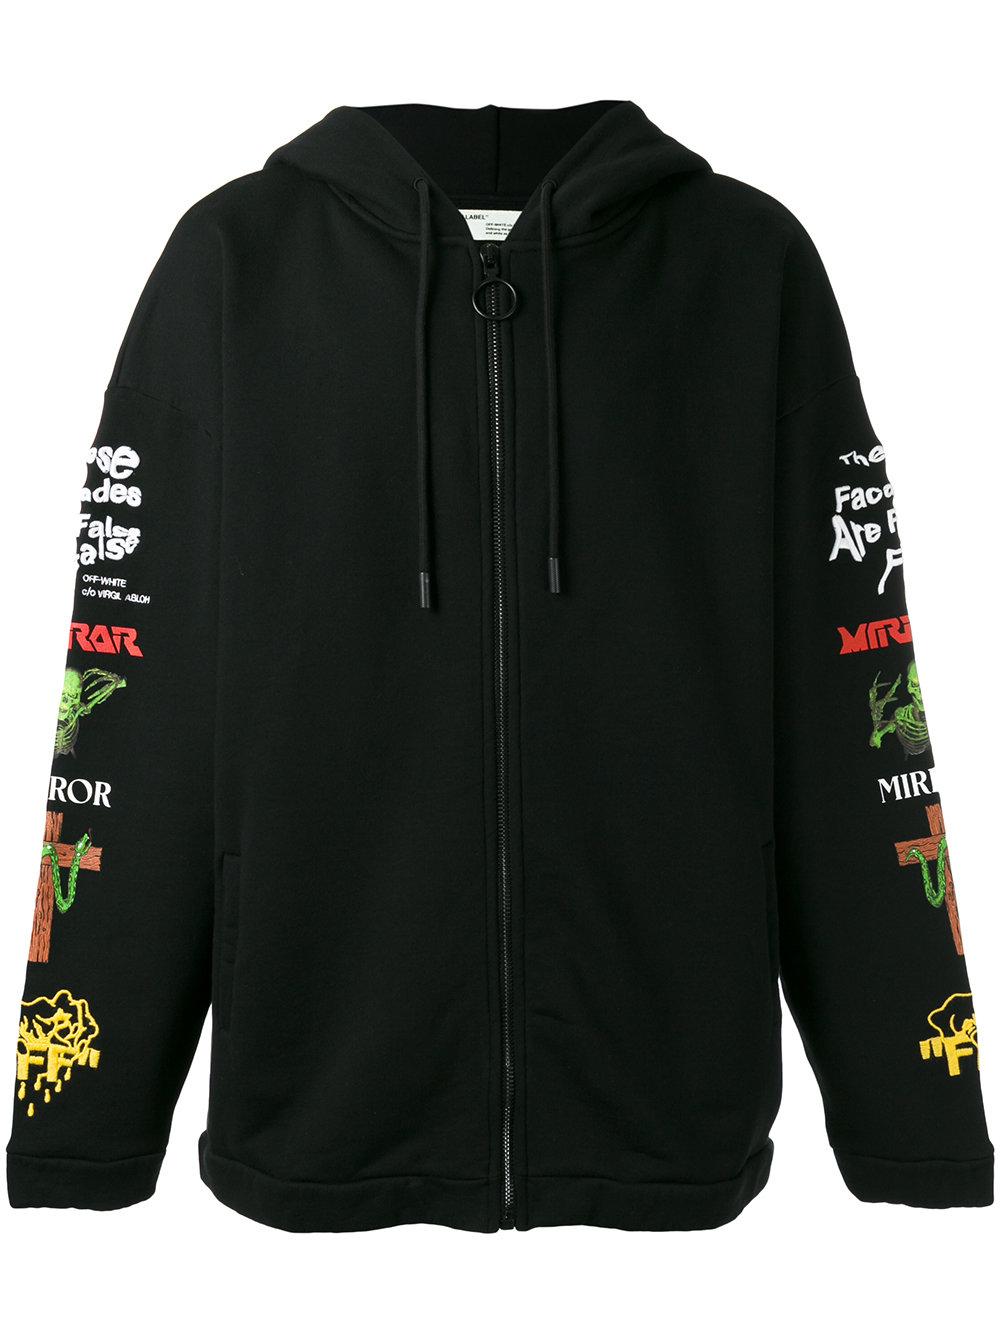 Off-white c/o virgil abloh Embroidered Hoodie in Black for Men | Lyst